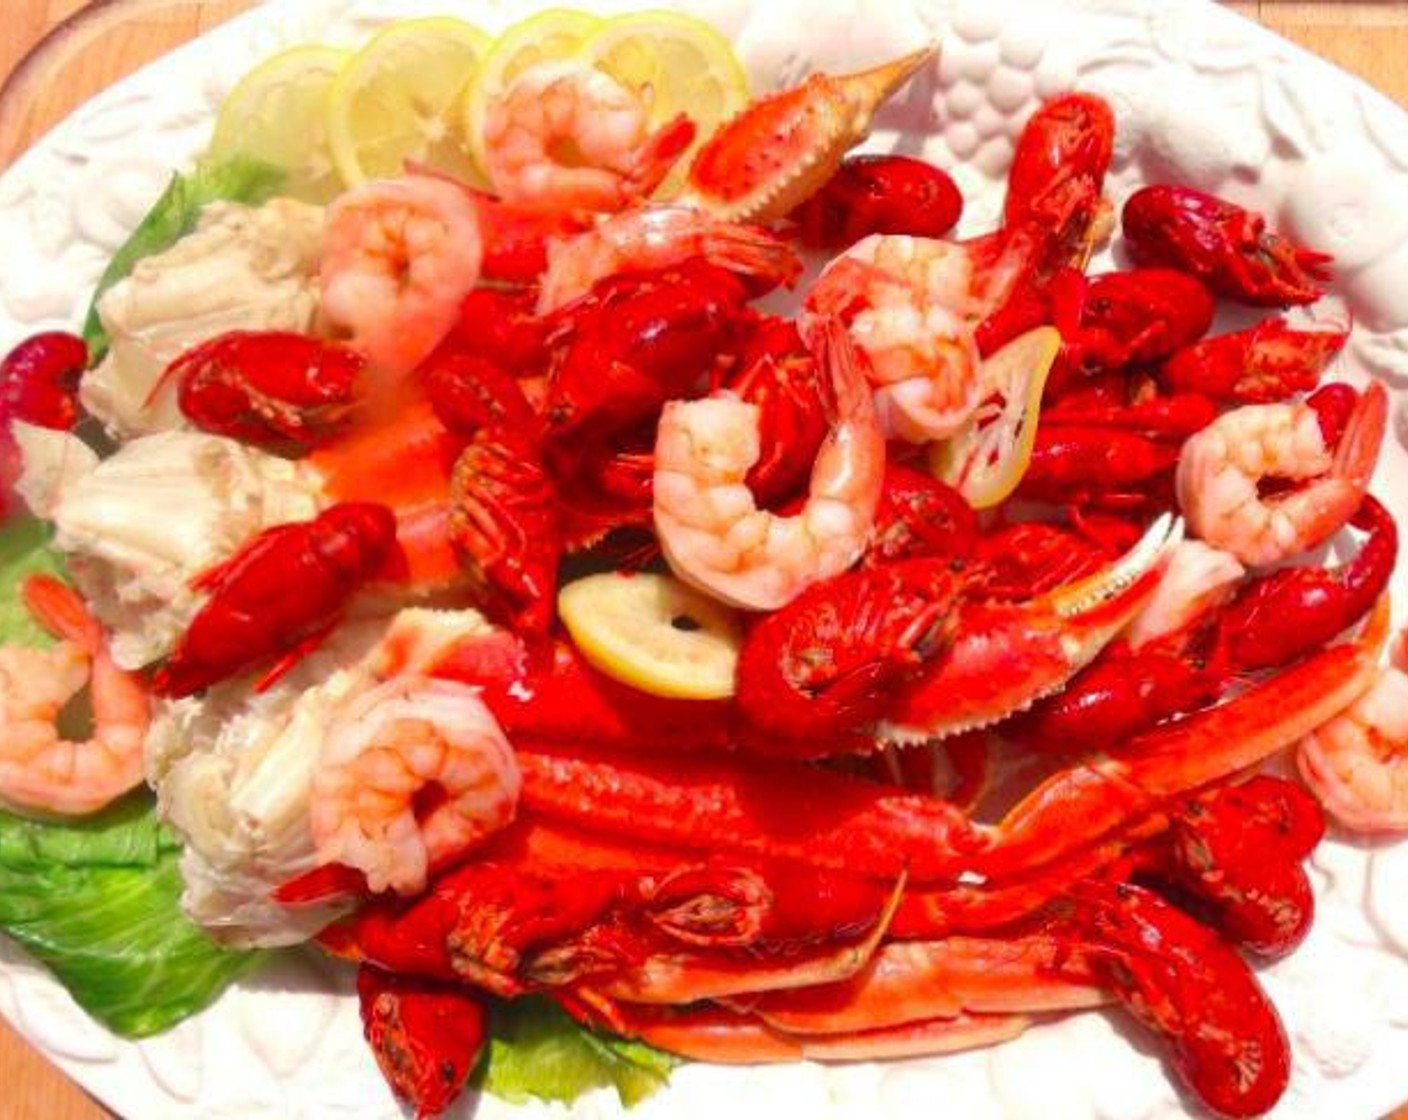 step 4 Plate seafood on a serving platter, drizzle with Butter (1/2 cup) and 2 cups of the seafood stock, serve with horseradish or Sweet Chili Sauce (to taste). Serve as appetizer or generous main course.